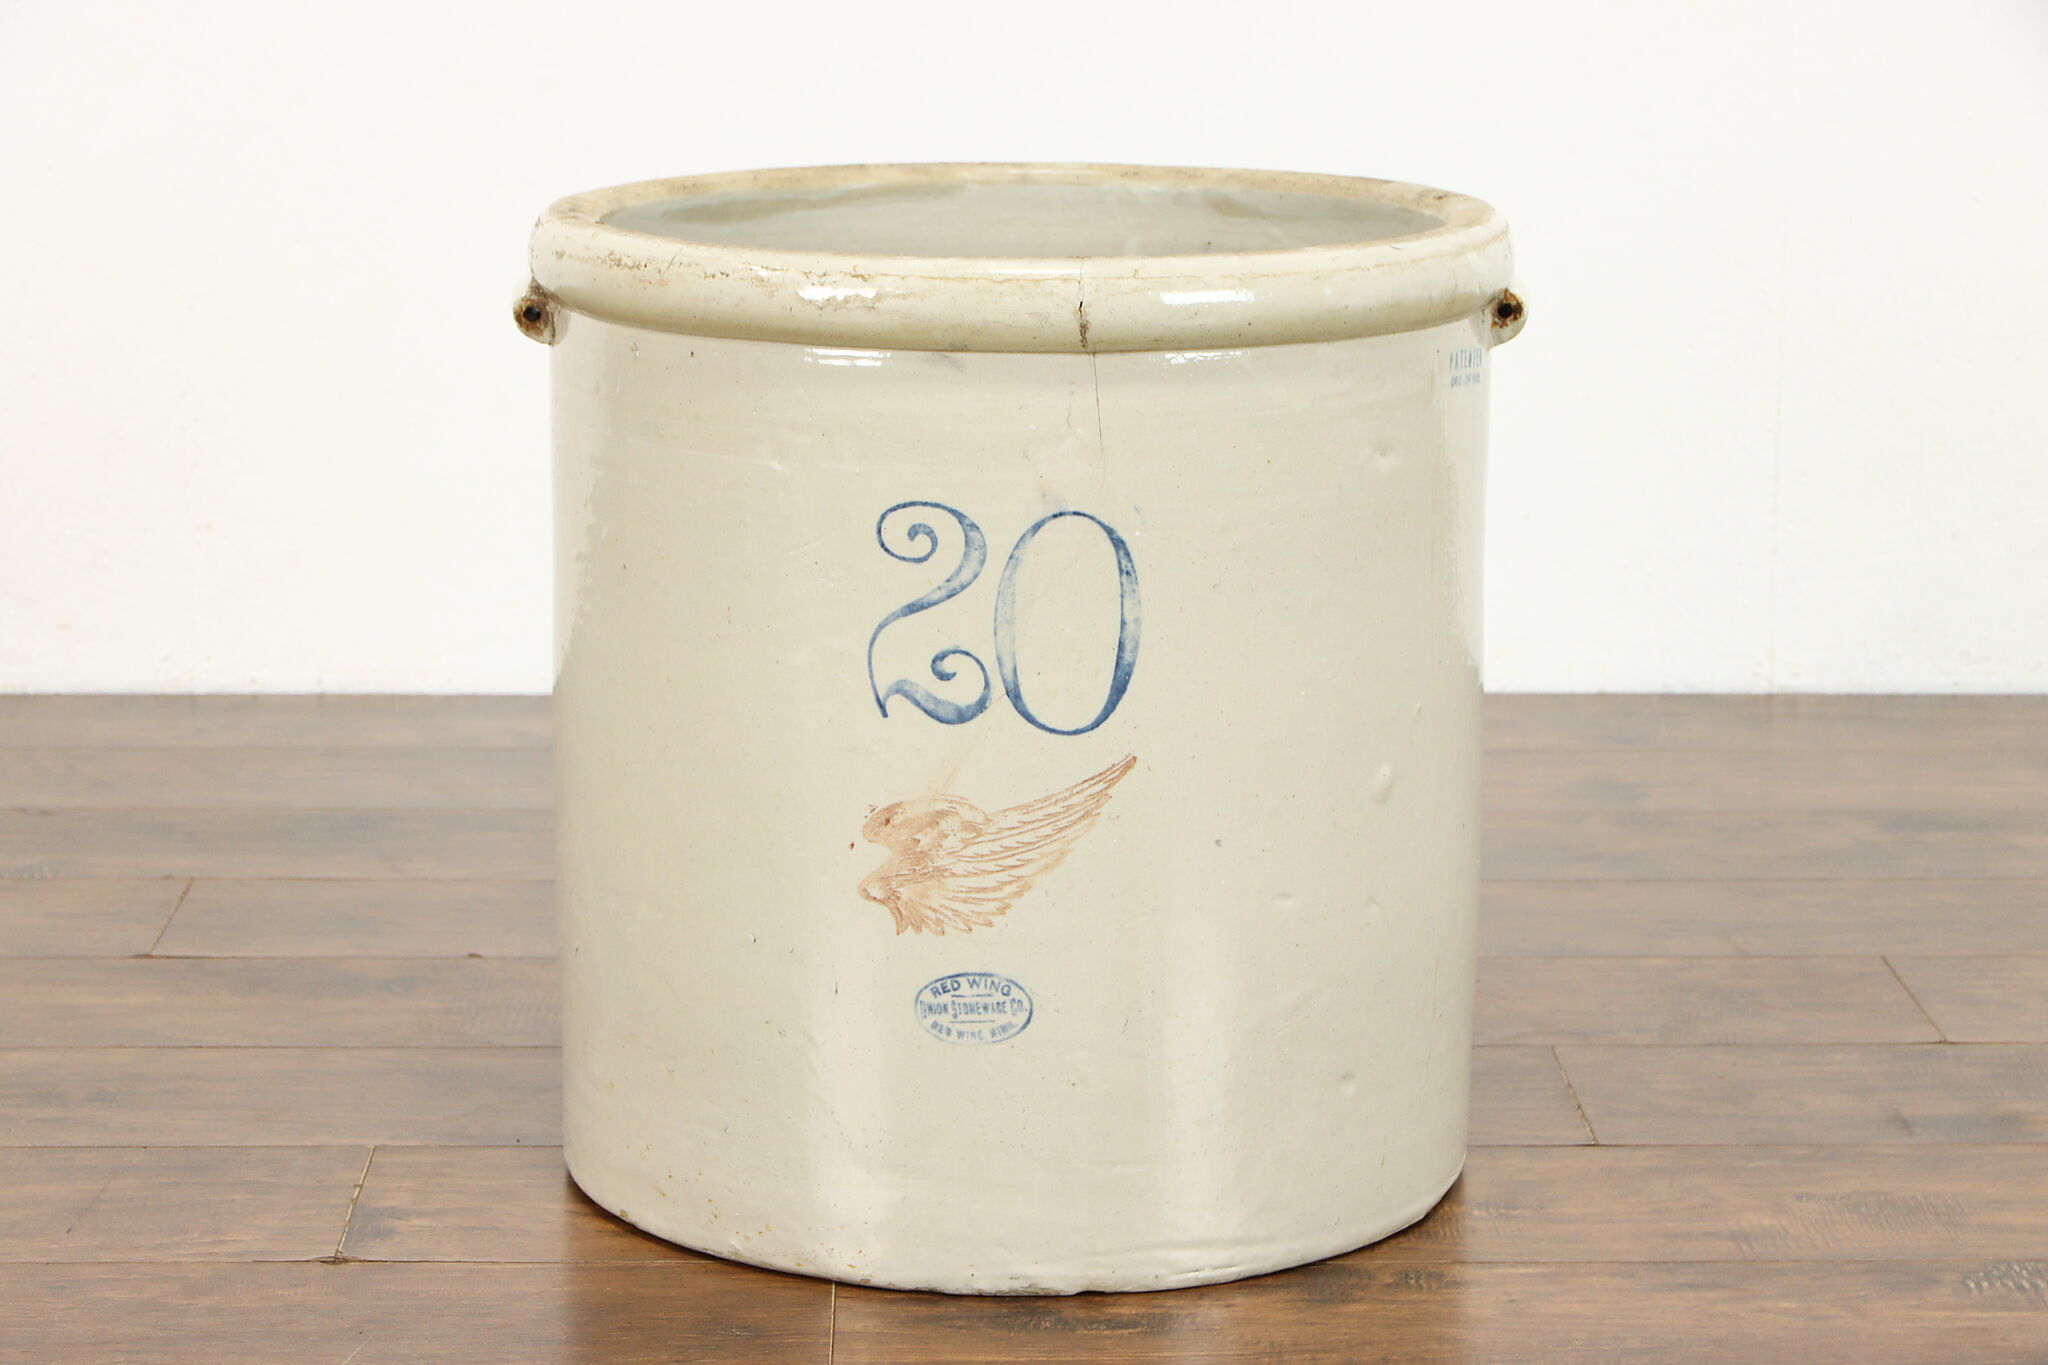 moronic Tilbageholdenhed Databasen Stoneware 20 Gallon Red Wing Country Farmhouse Antique Crock